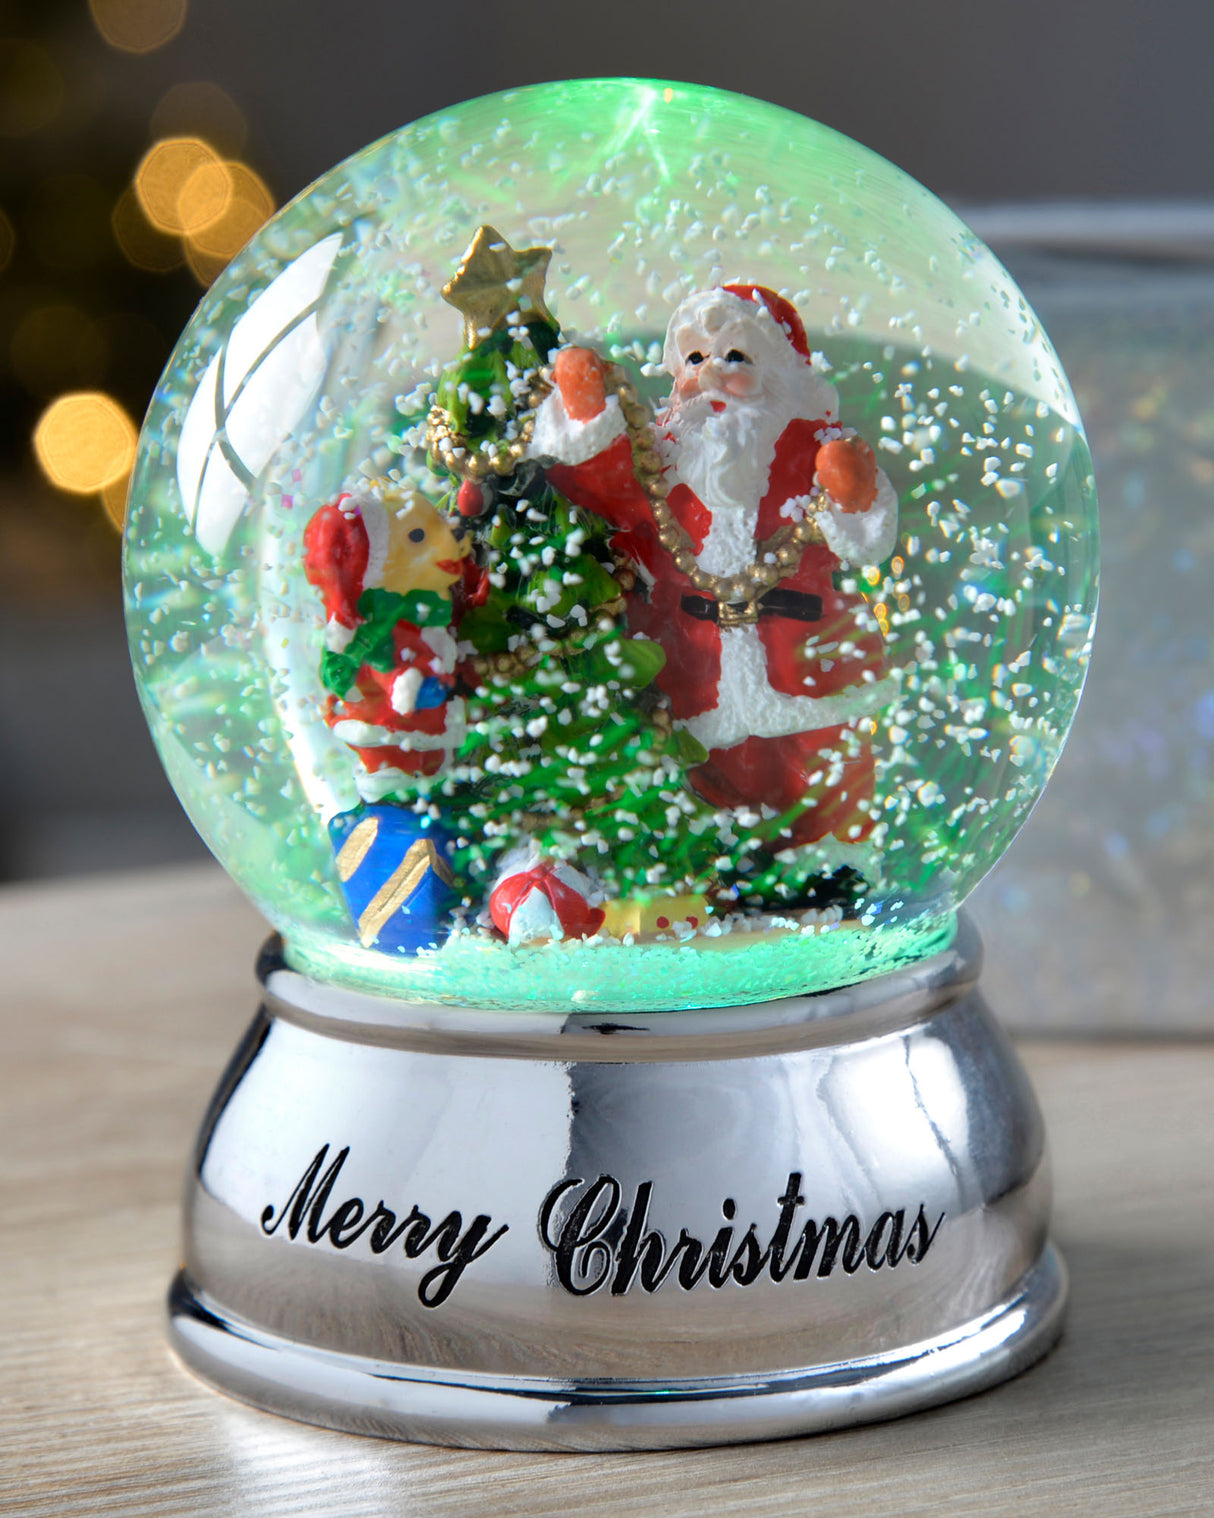 Colour Changing Merry Christmas Snowglobe, 10 cm